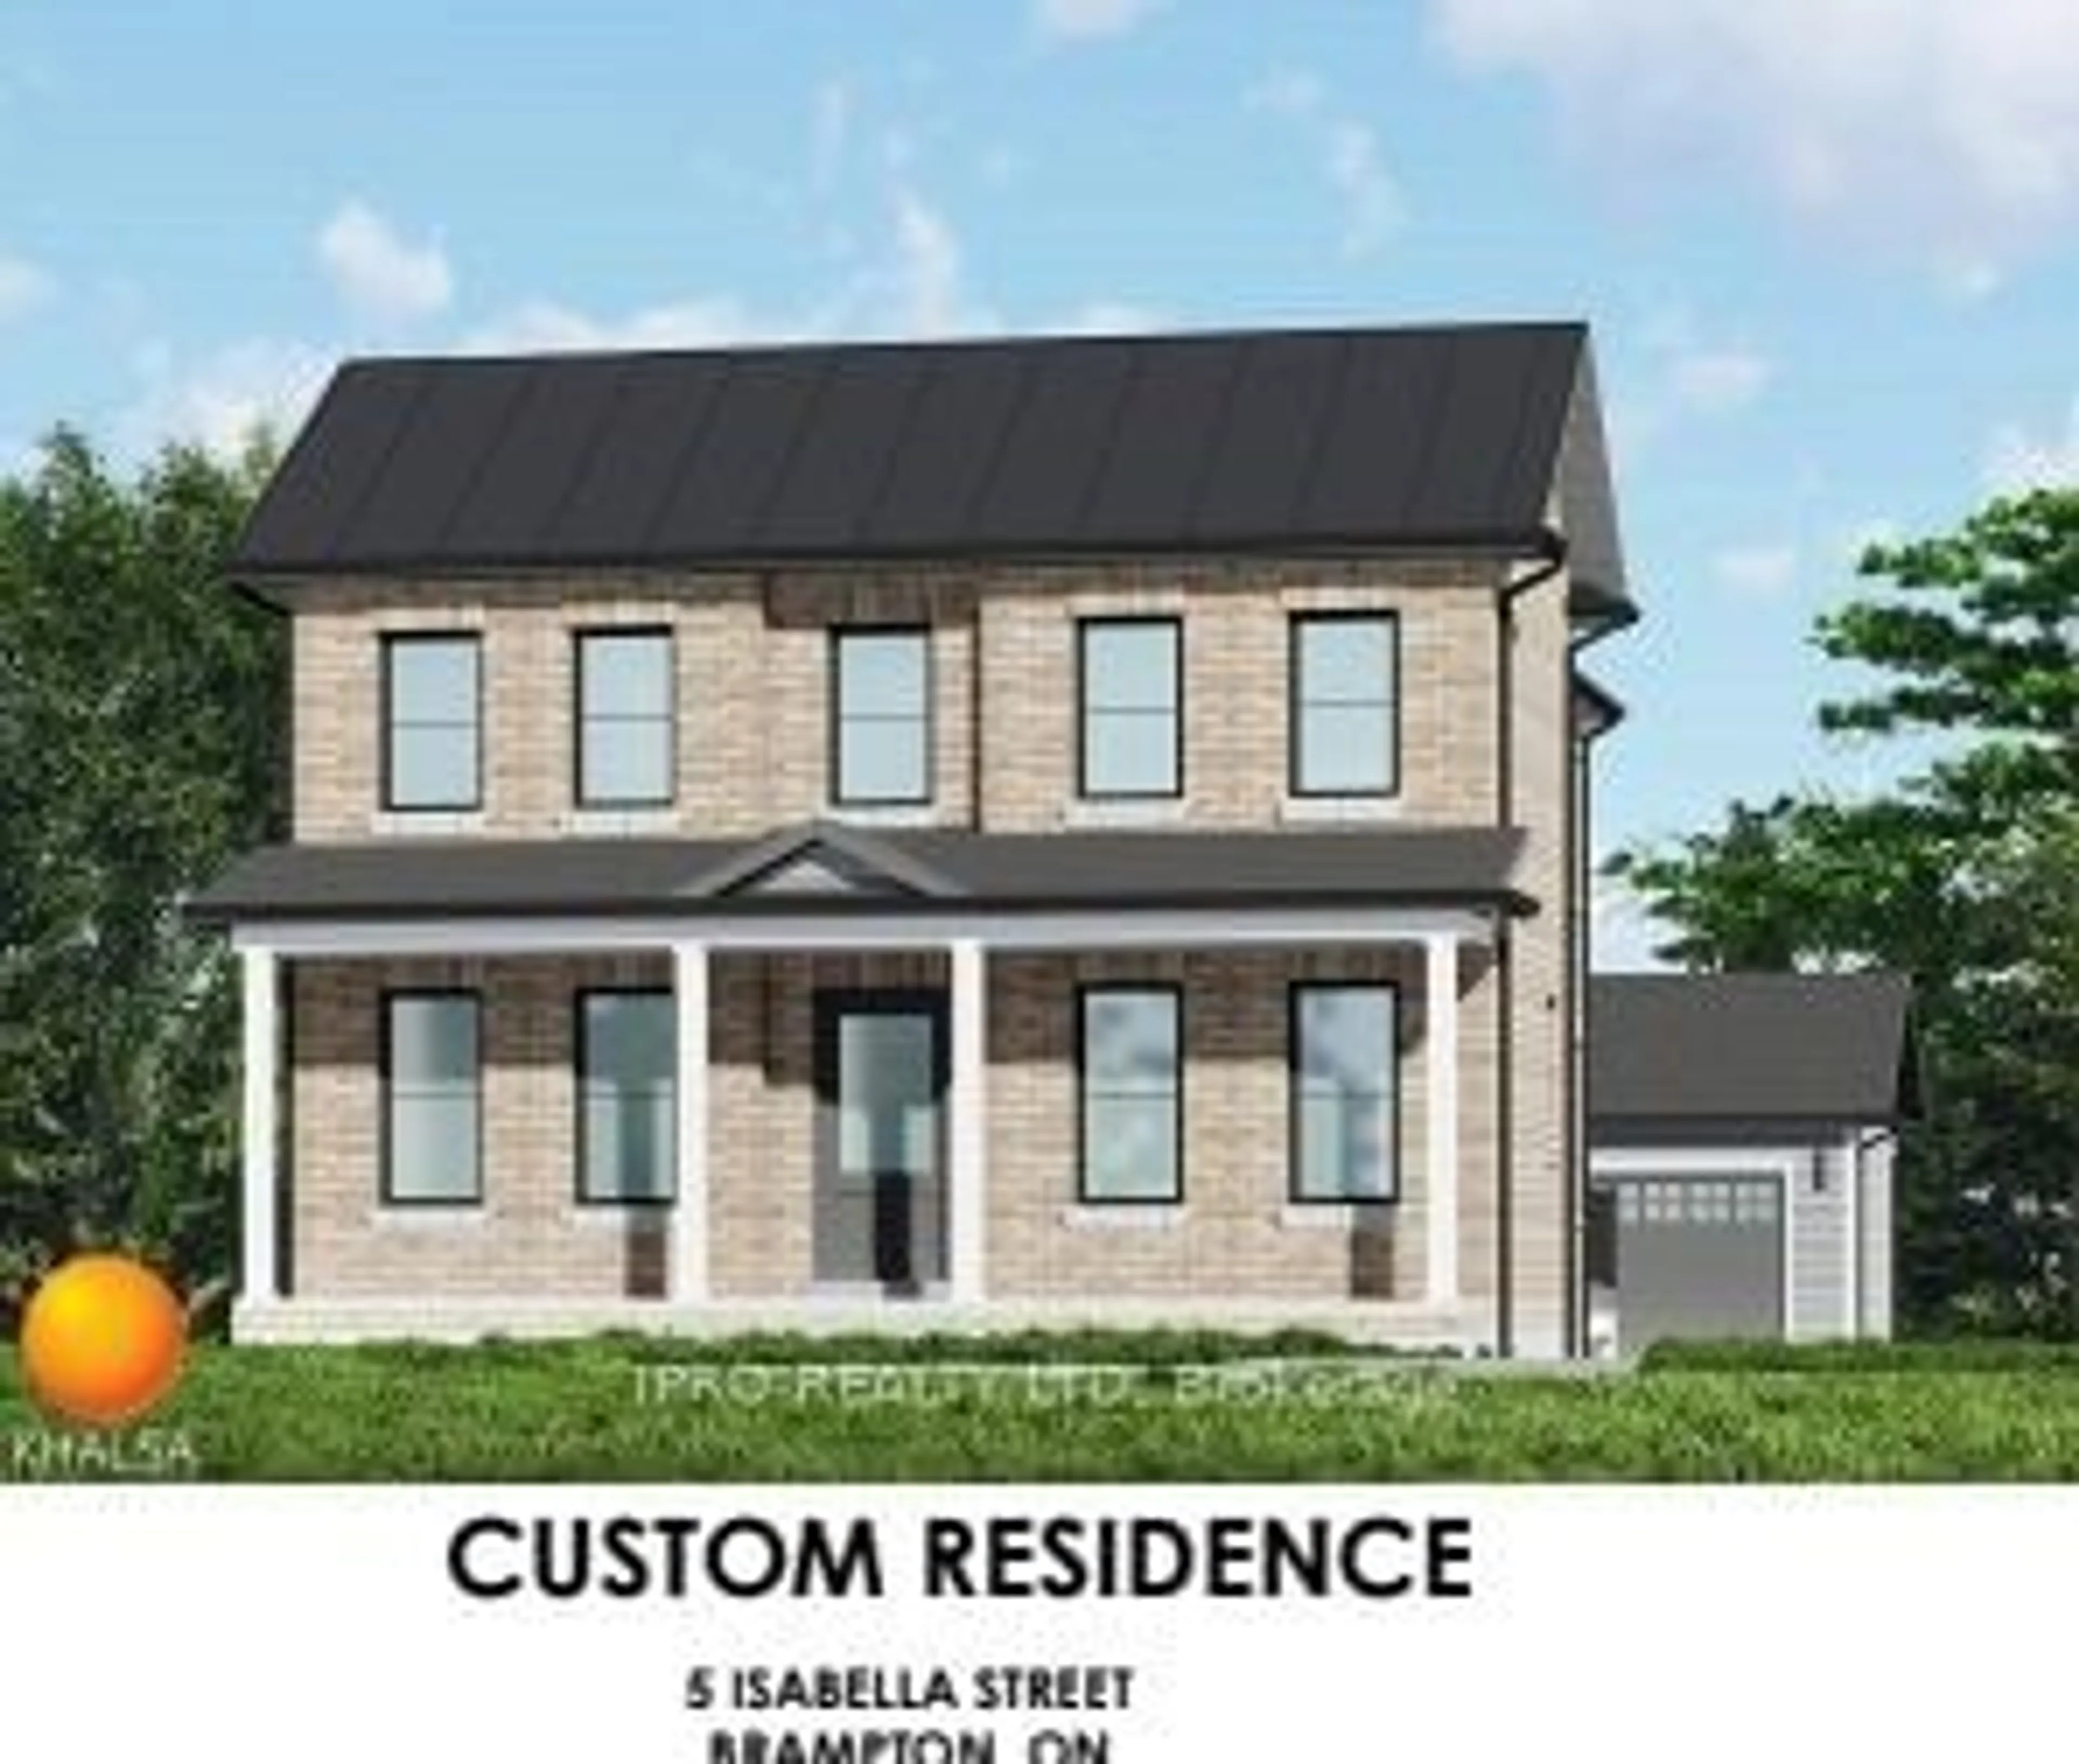 Home with brick exterior material for 5 Isabella St, Brampton Ontario L6X 1P4